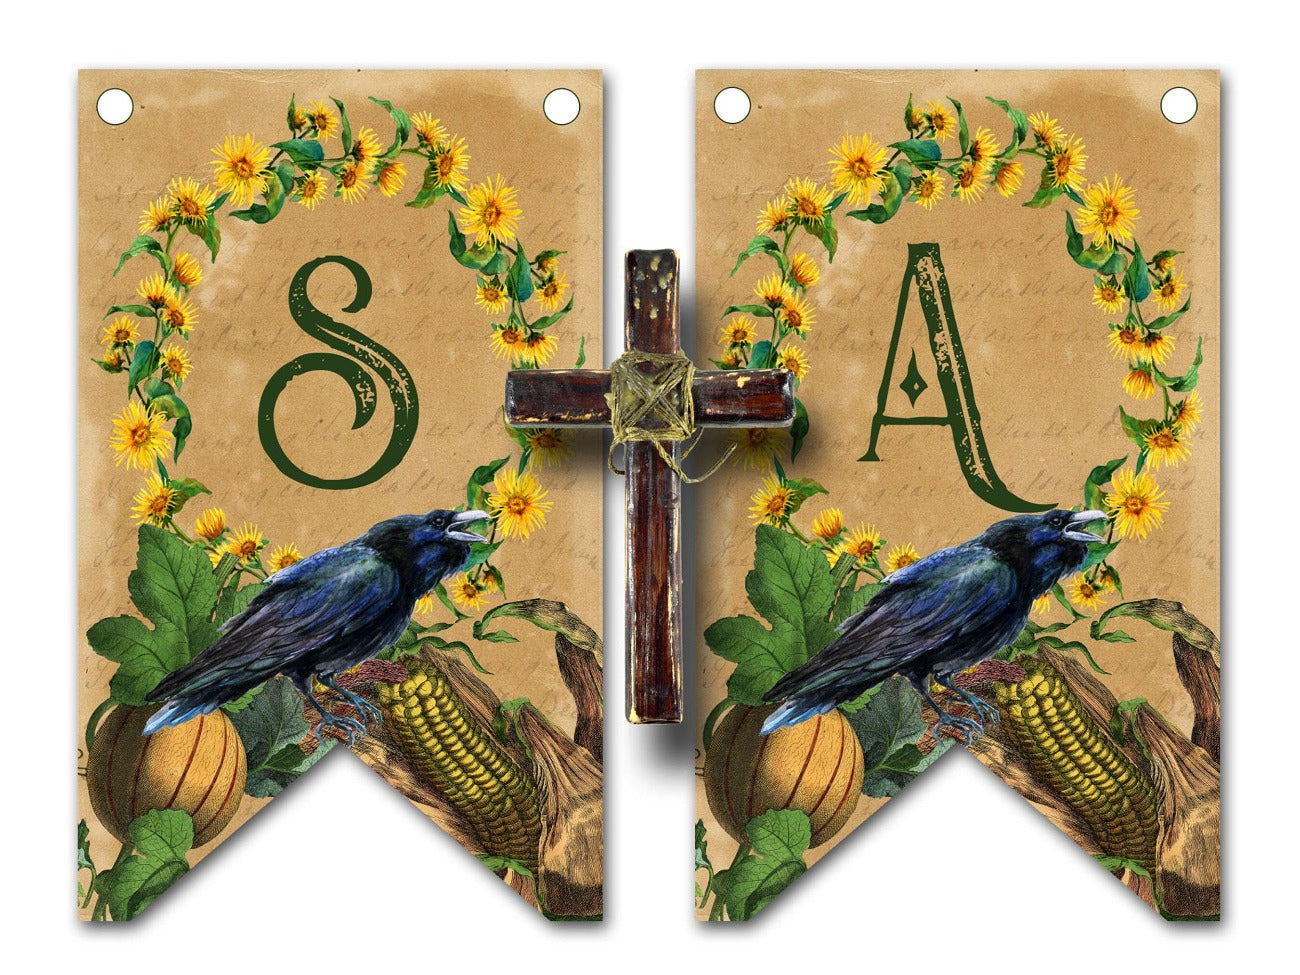 LUGHNASADH BANNER Bunting, Lughnasadh Flags Decoration with Raven and sunflowers on a parchment background.